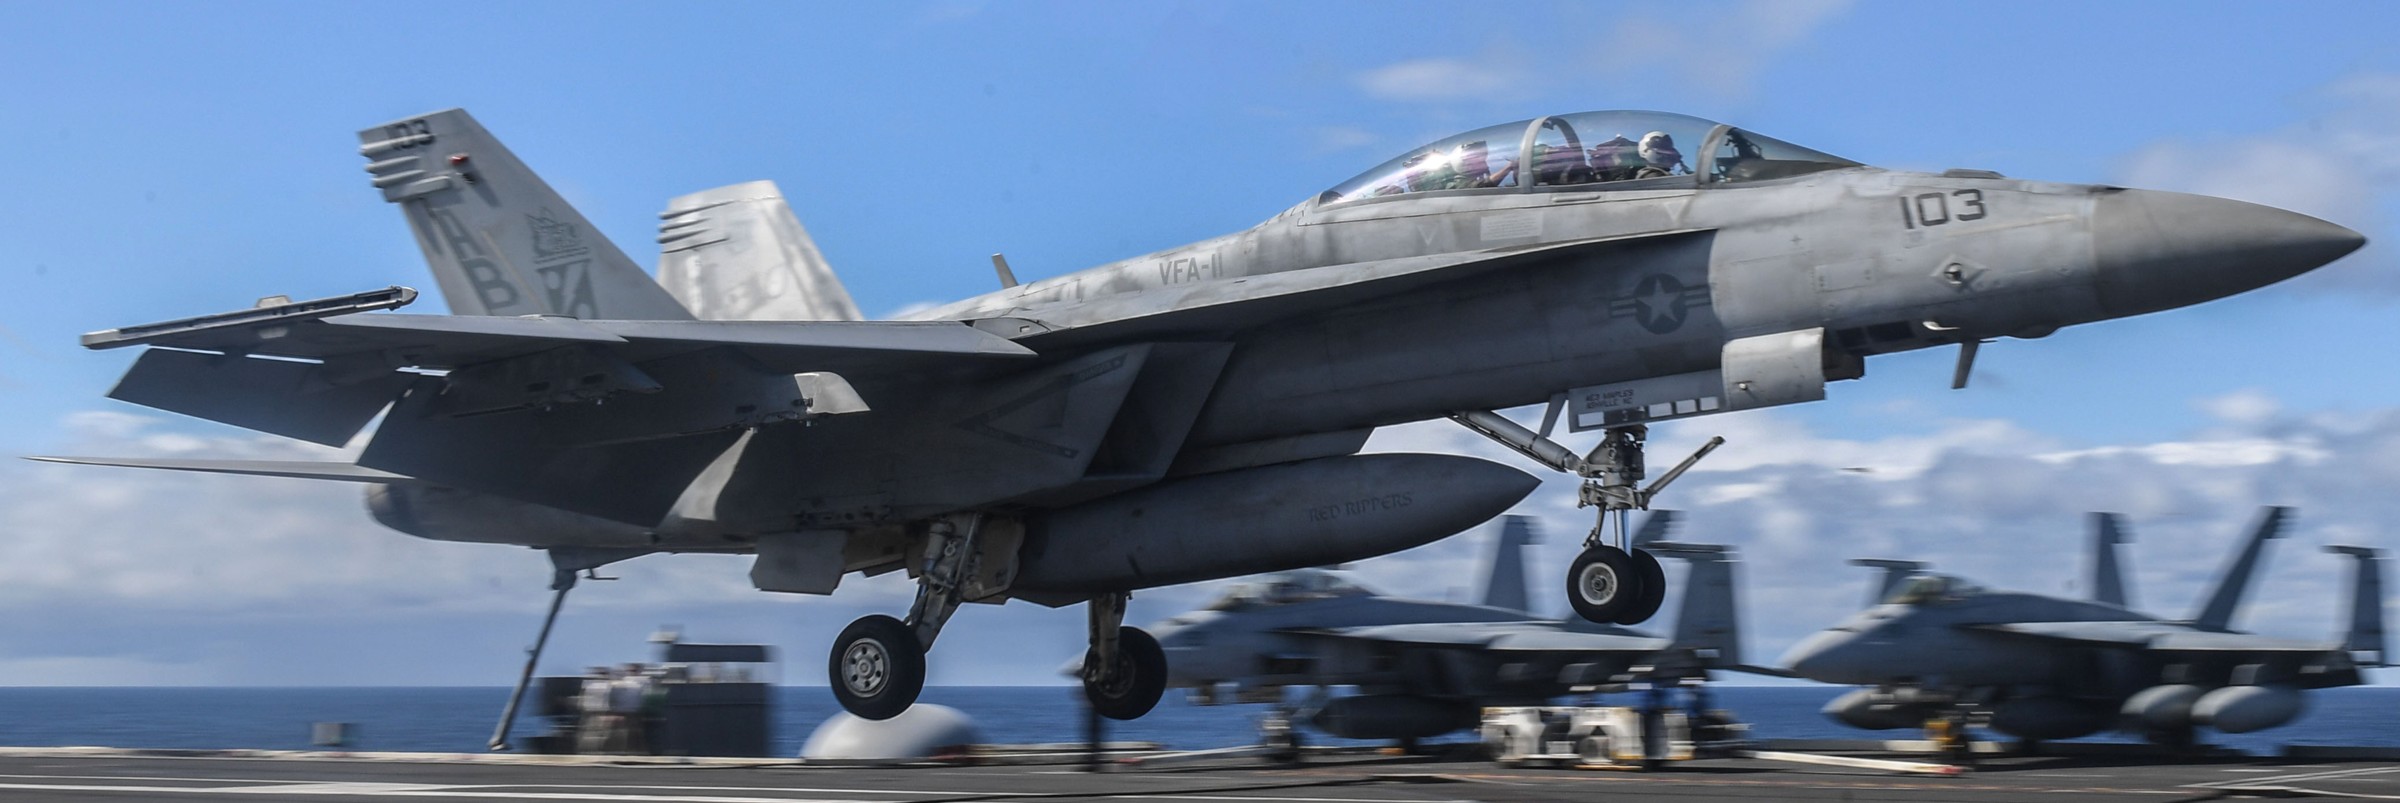 vfa-11 red rippers strike fighter squadron us navy f/a-18f super hornet carrier air wing cvw-1 uss harry s. truman cvn-75 57